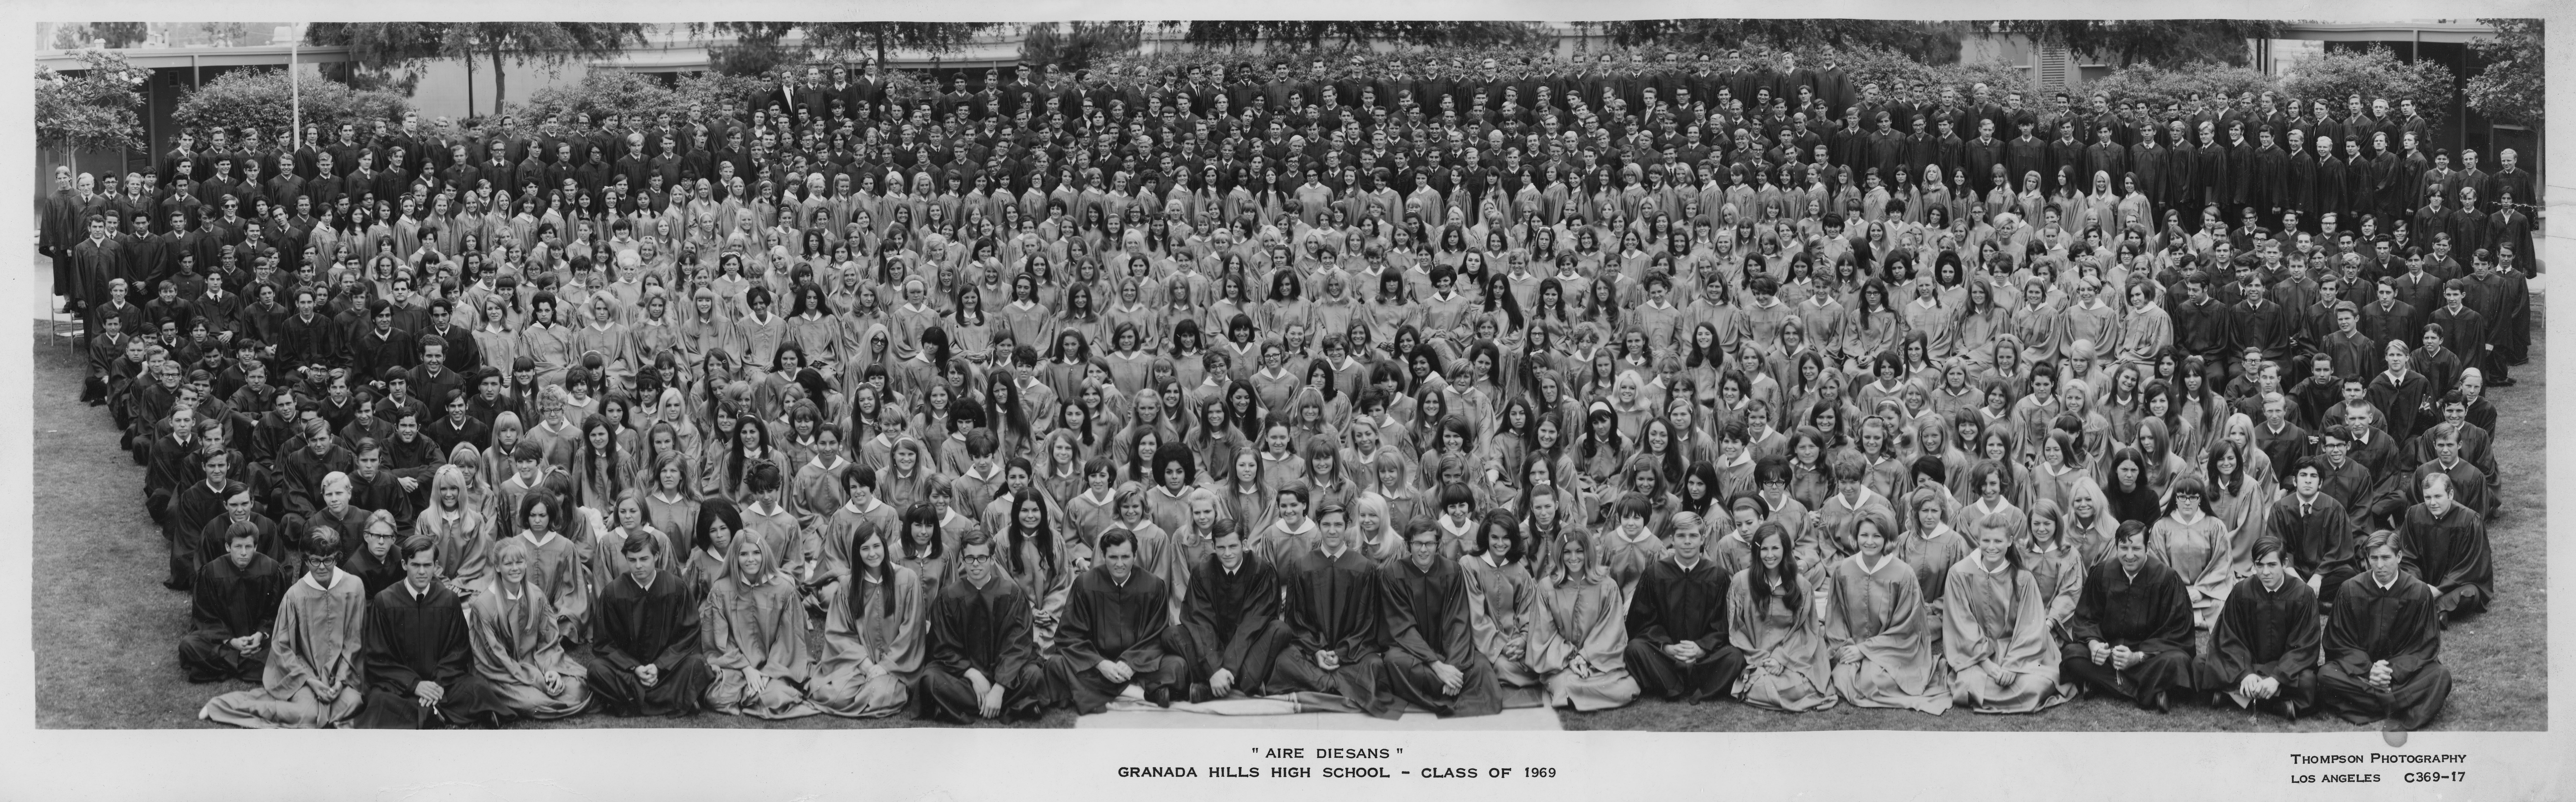 Granada Hills High School Class of Summer, 1969 - Click on image for enlarged version